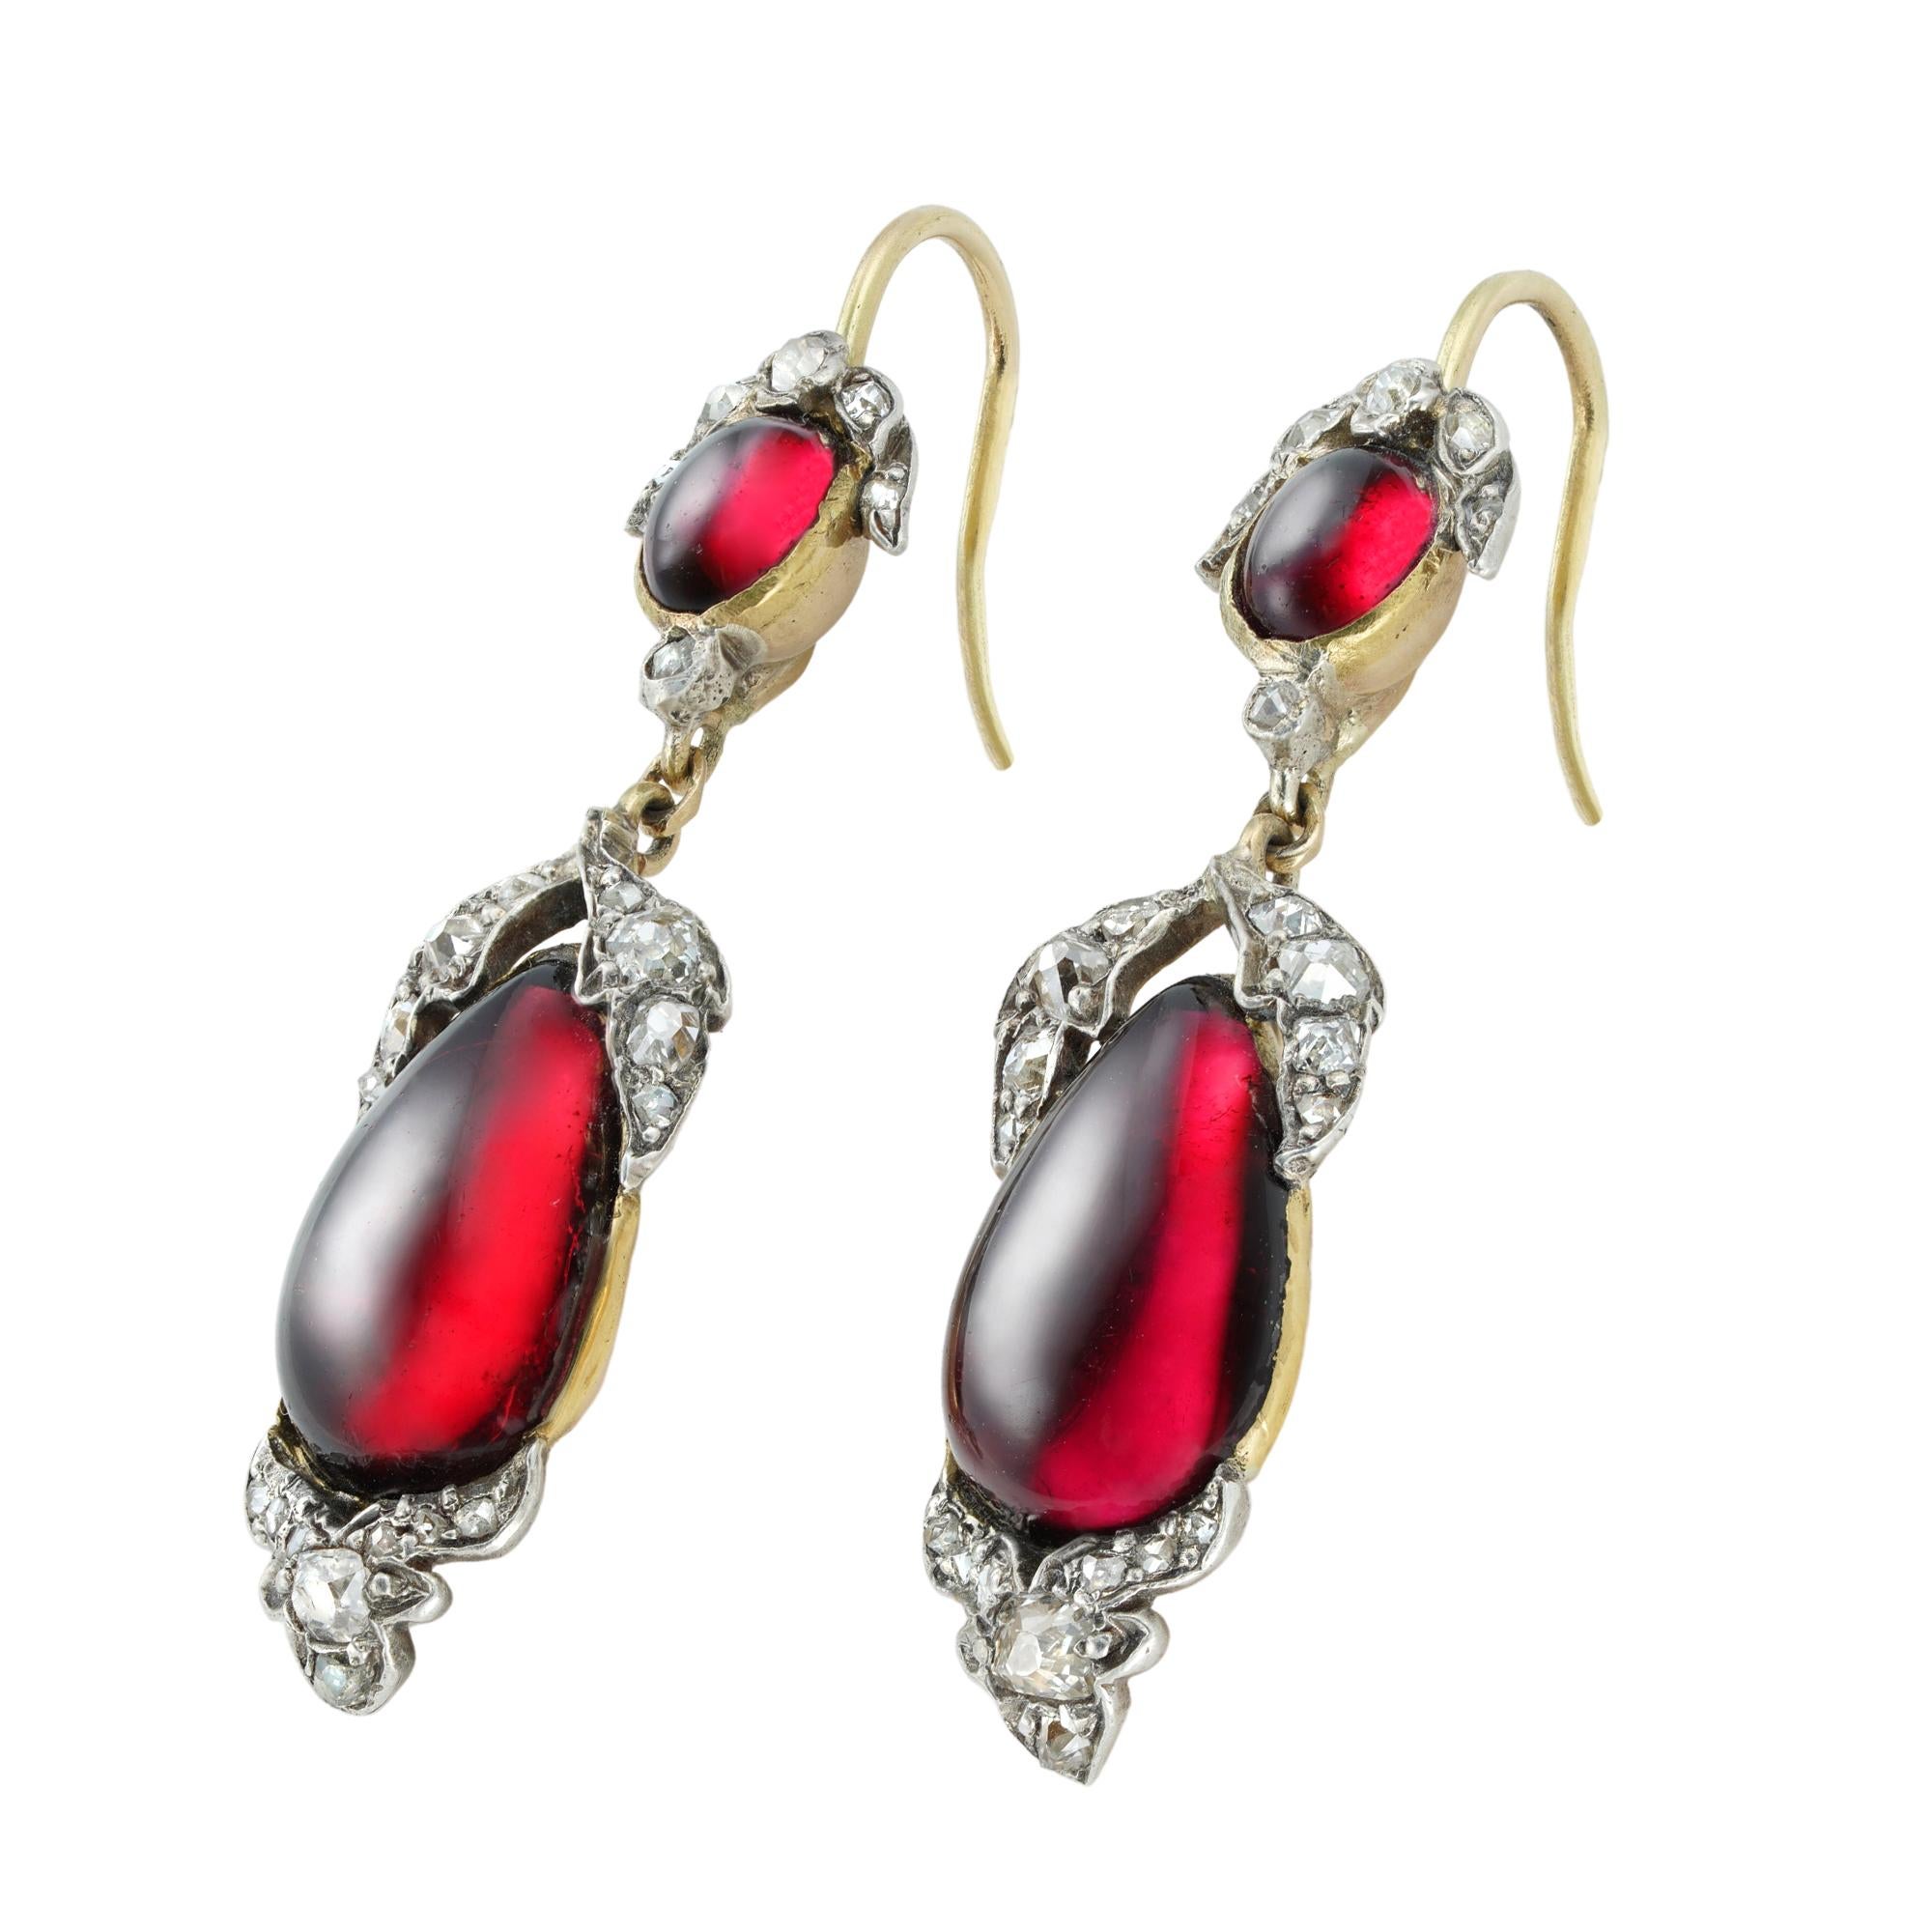 A pair of Victorian garnet and diamond drop earrings, each earring consisted of an oval cabochon garnet with diamond-set leaves above, suspending a pear-shape cabochon garnet with similar foliate diamond-set decorations, all mounted in silver and